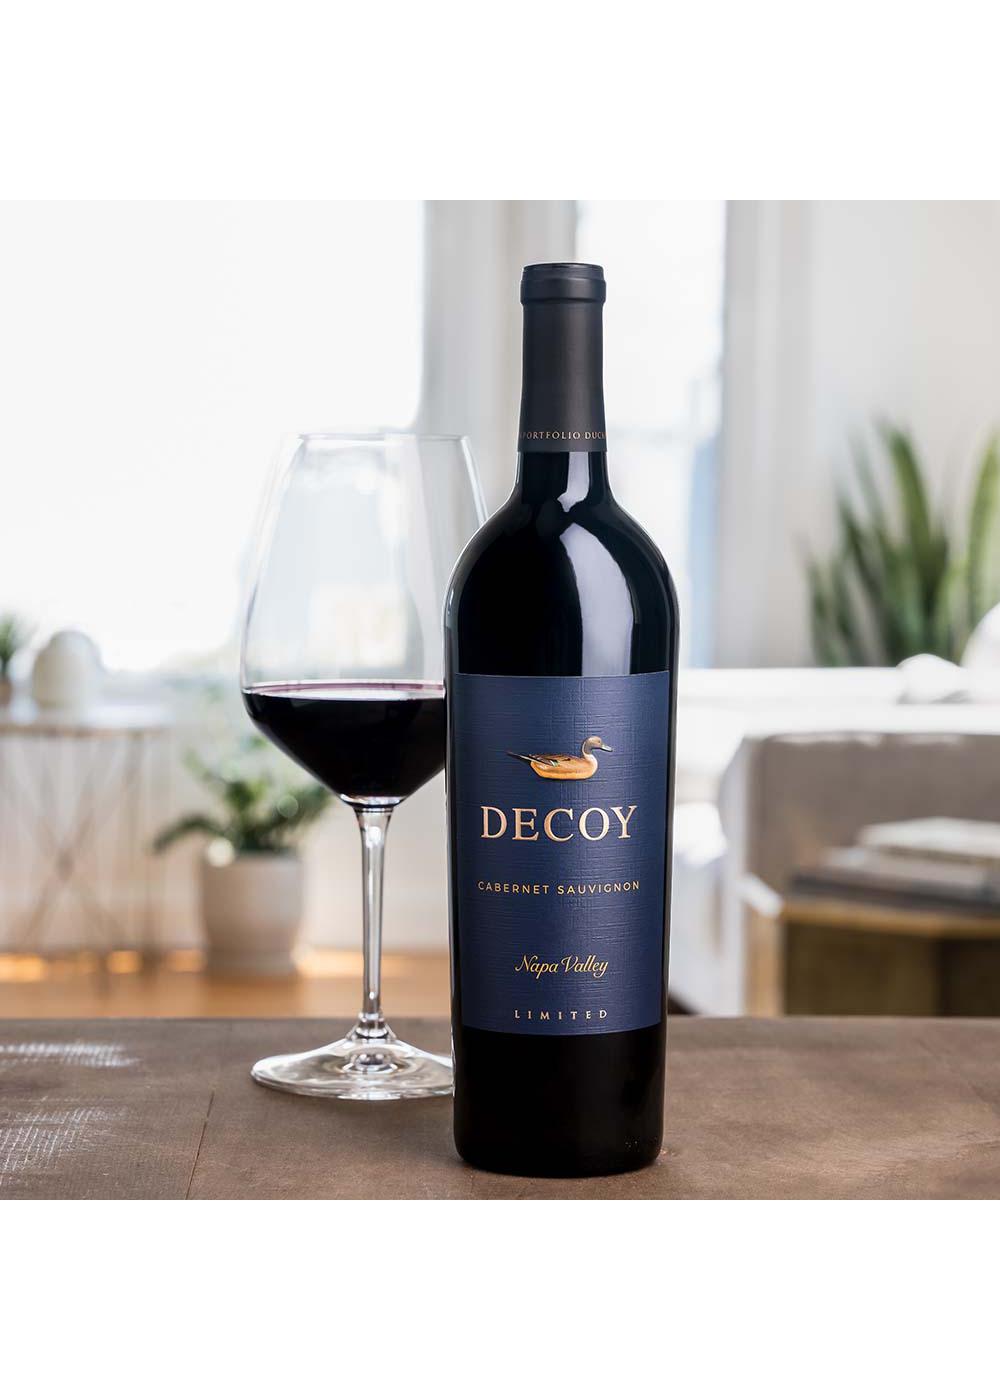 Decoy Limited Napa Valley Cabernet Sauvignon Red Wine; image 2 of 2